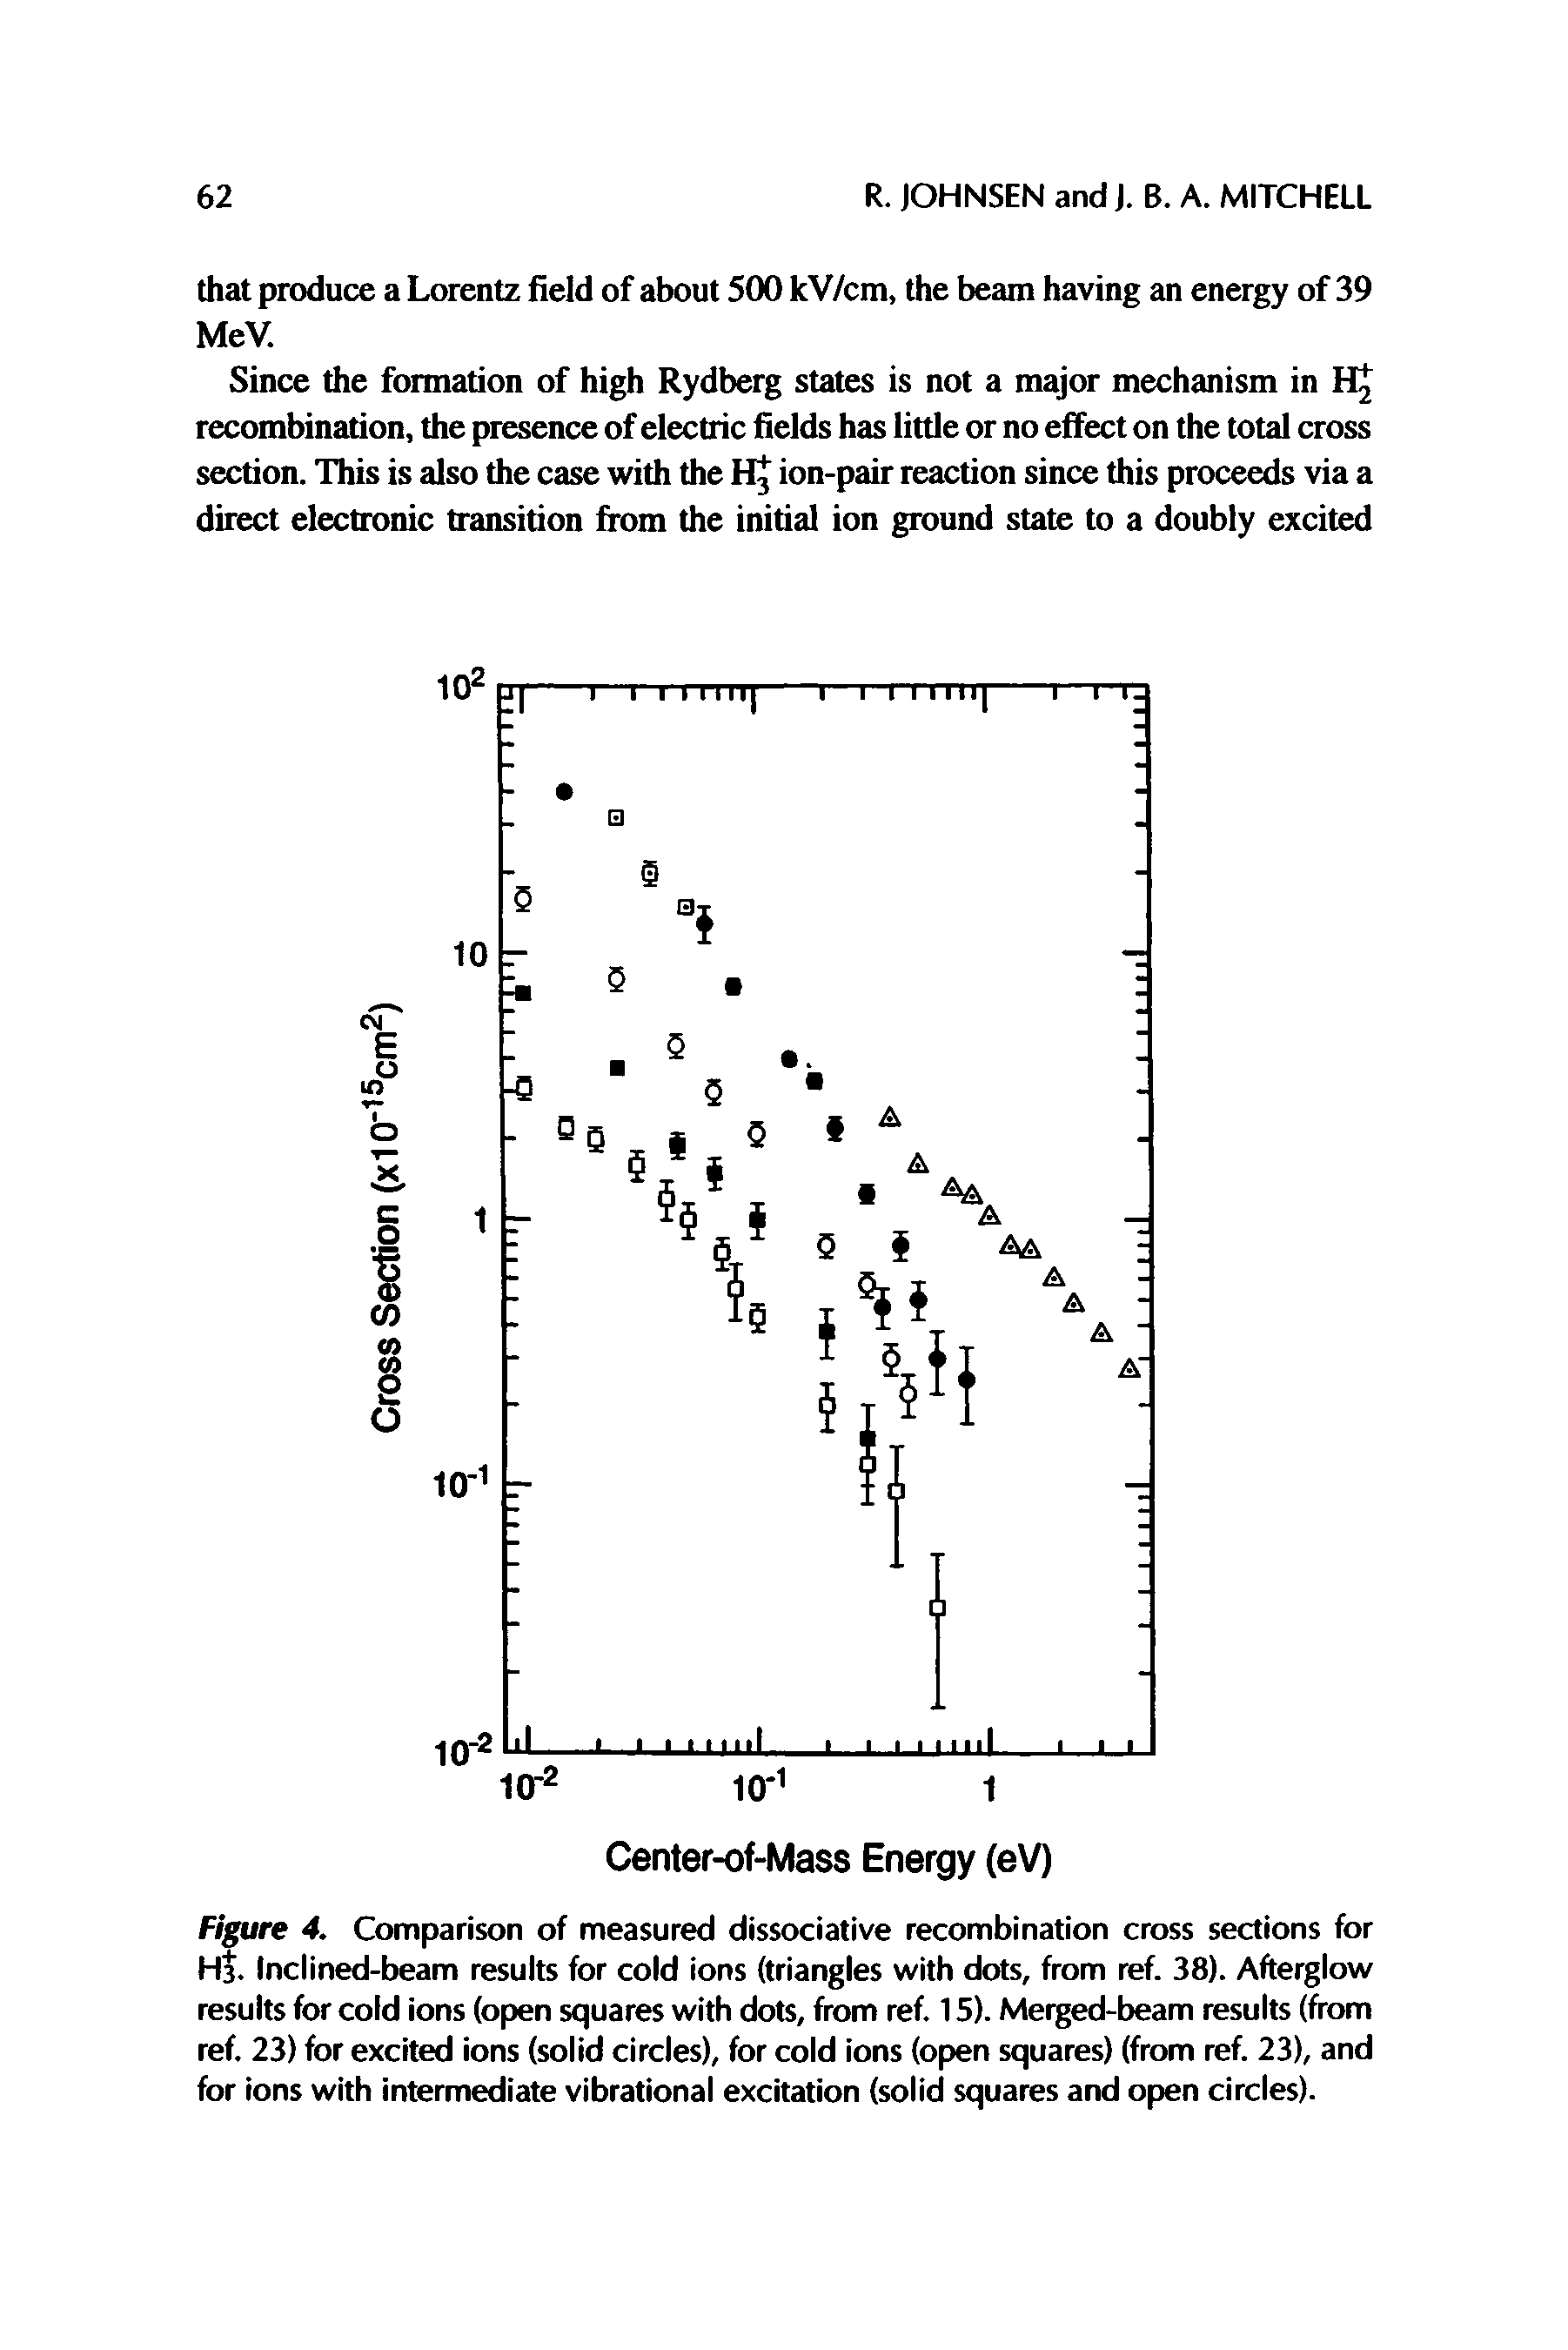 Figure 4. Comparison of measured dissociative recombination cross sections for H. Inclined-beam results for cold ions (triangles with dots, from ref. 38). Afterglow results for cold ions (open squares with dots, from ref. 15). Merged-beam results (from ref. 23) for excited ions (solid circles), for cold ions (open squares) (from ref. 23), and for ions with intermediate vibrational excitation (solid squares and open circles).